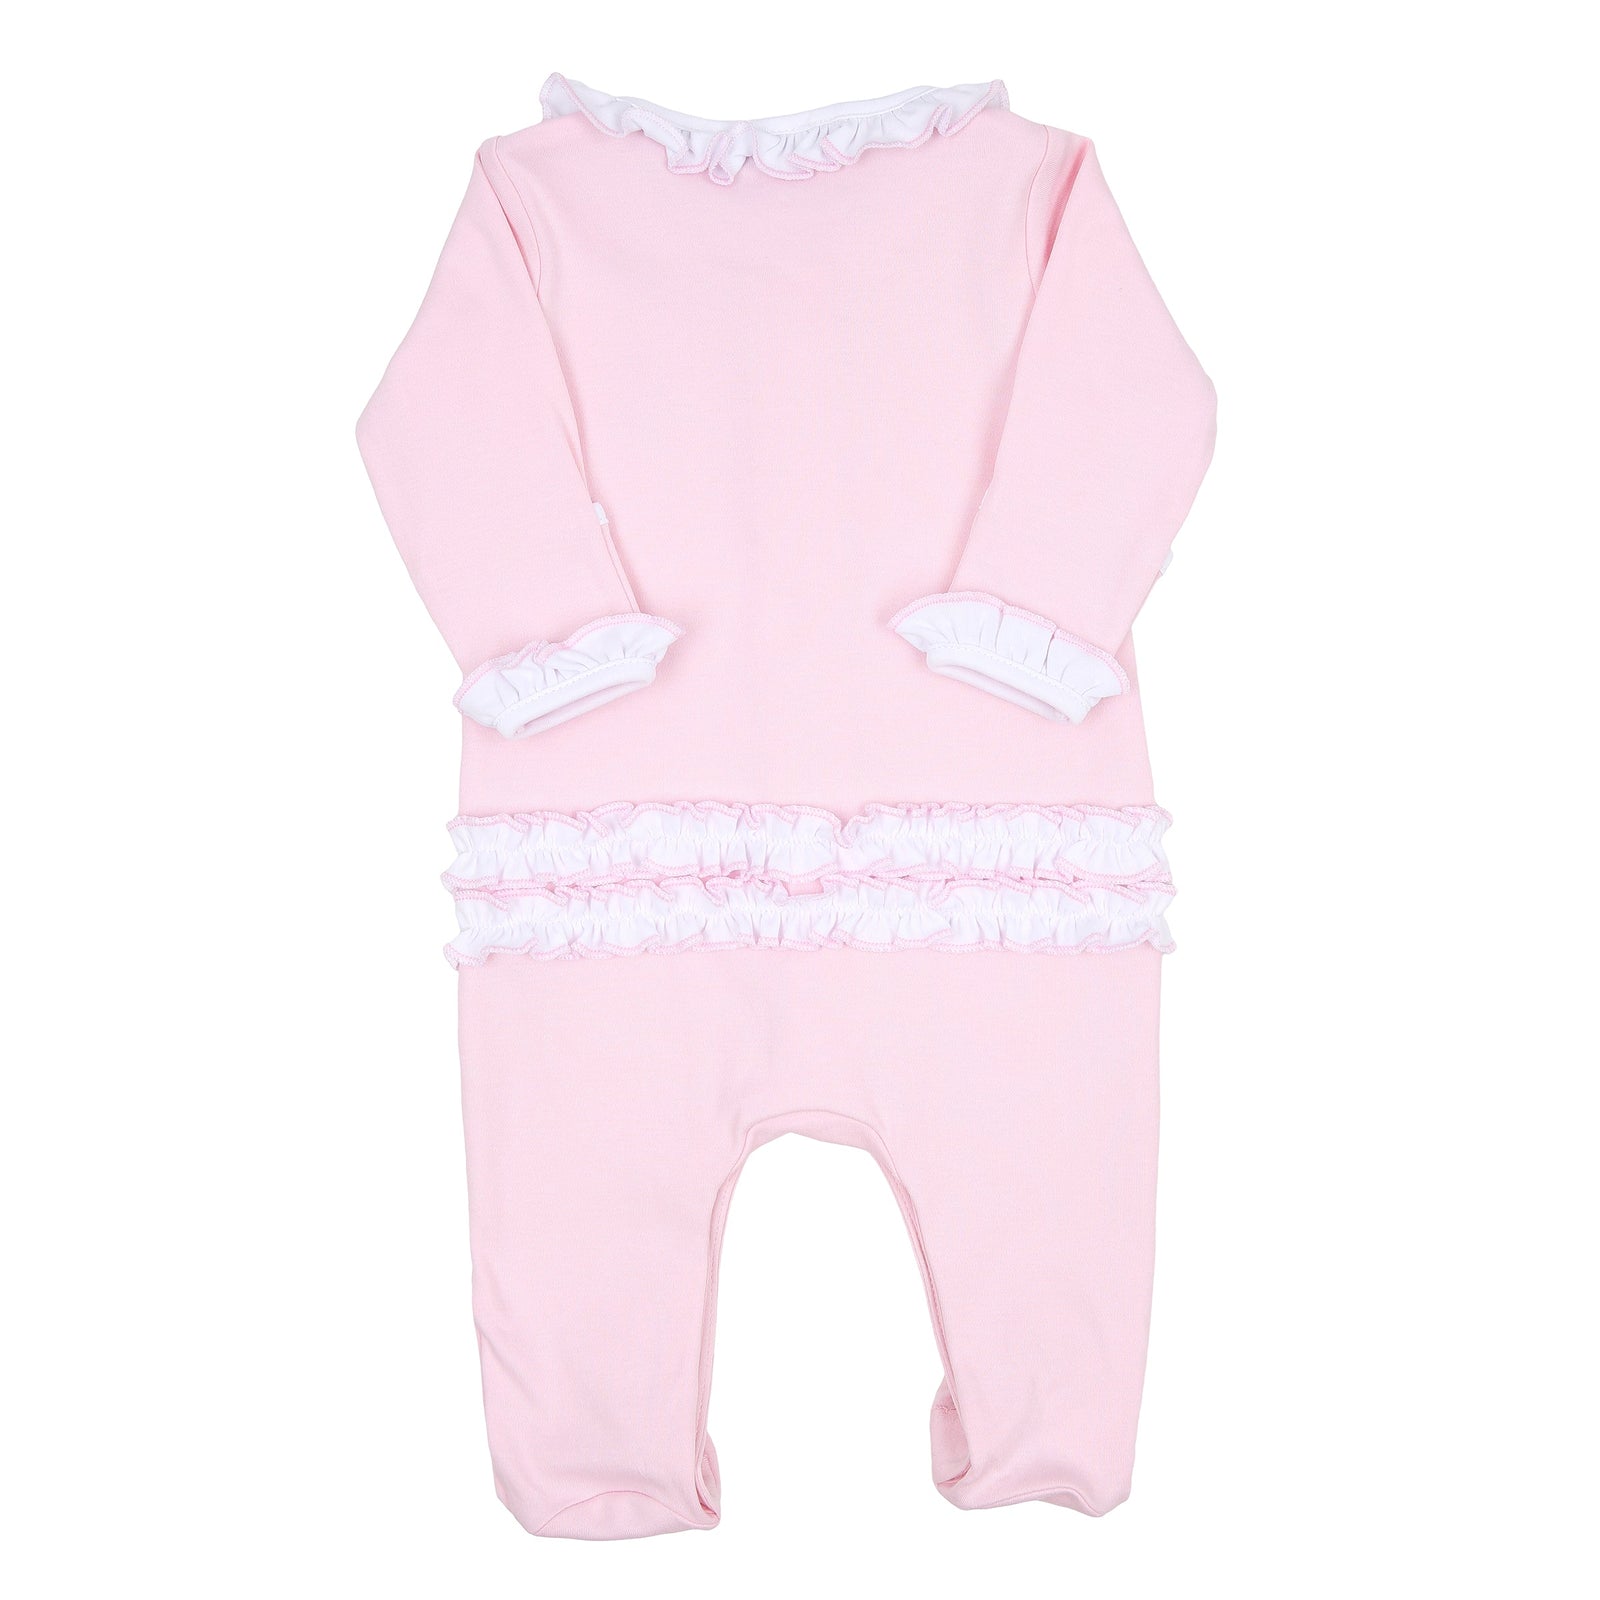 Hope's Rose Spring Embroidered Ruffle Footie | Pink